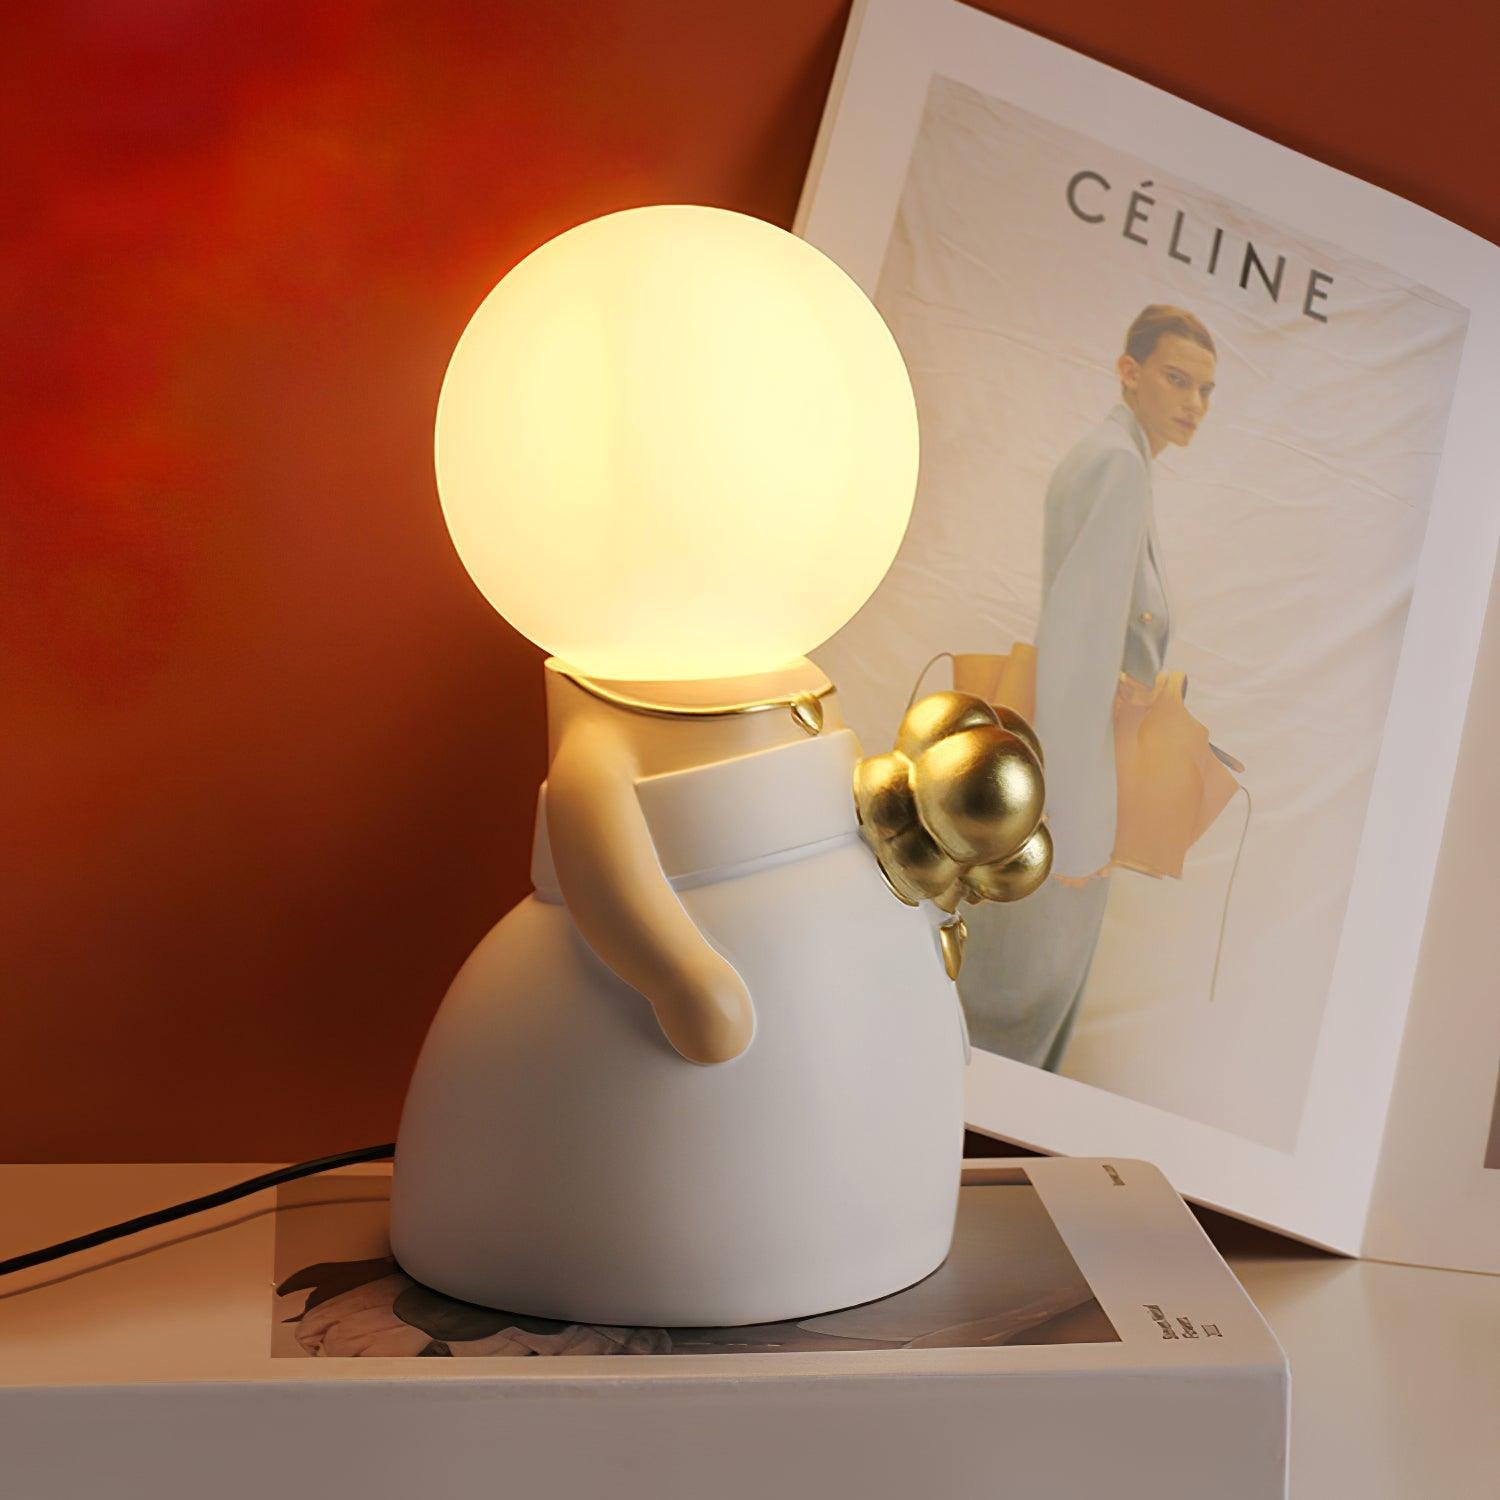 Wedding Table Lamp Madam for Decoration, White color, with dimensions of ∅ 4.9″ x H 8.7″ (12.5cm x 22cm)